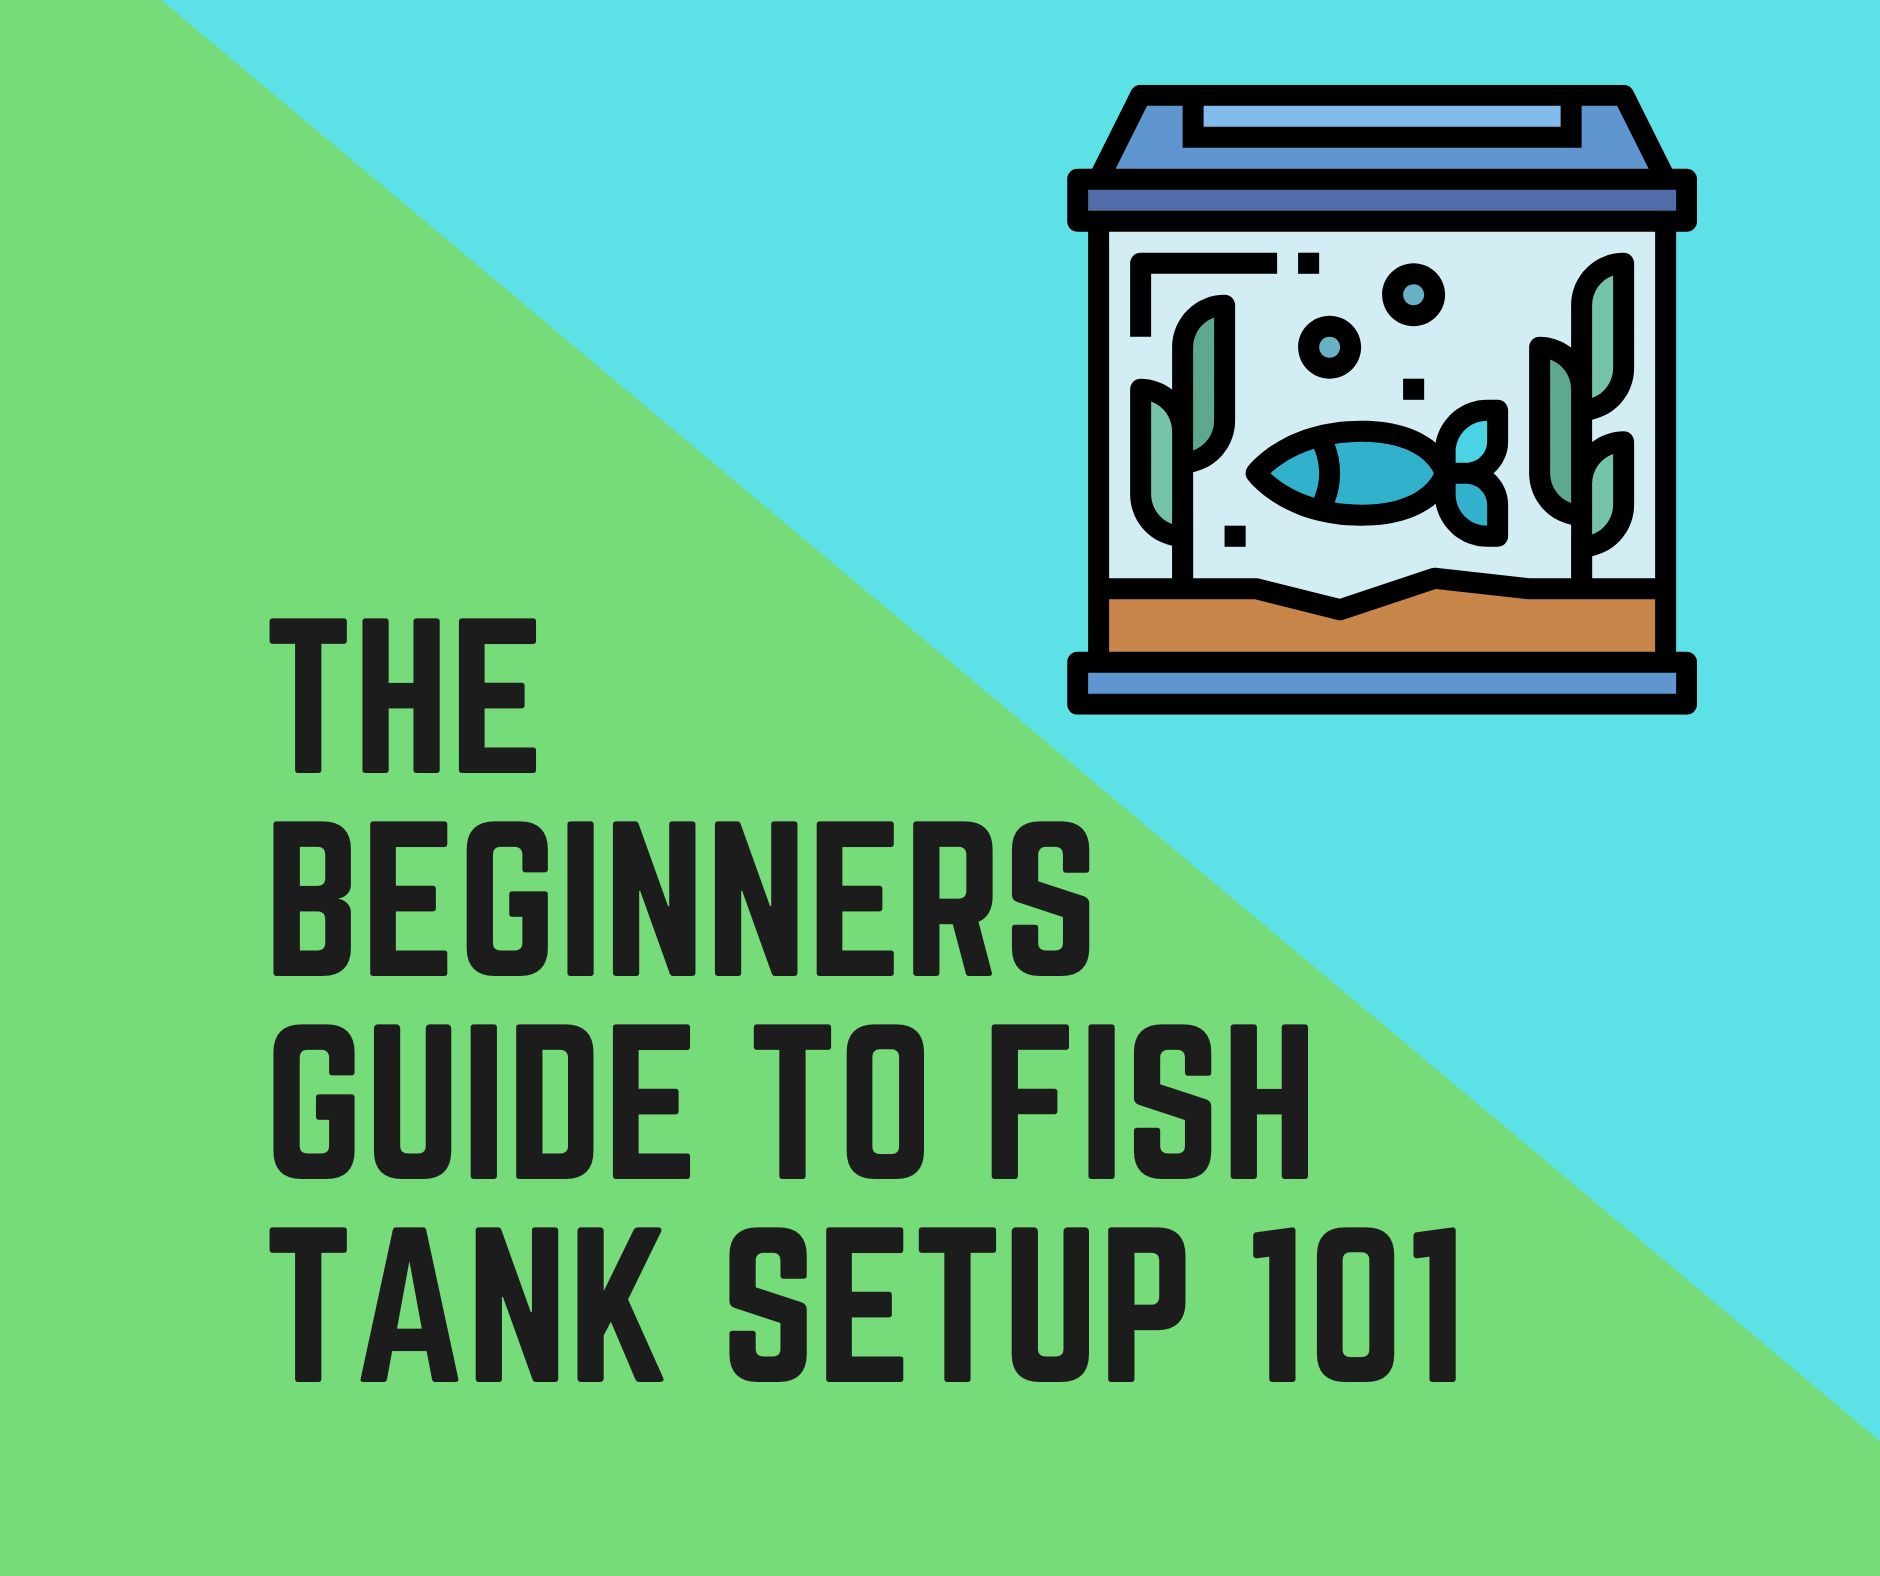 The Beginners Guide to Fish Tank Setup 101